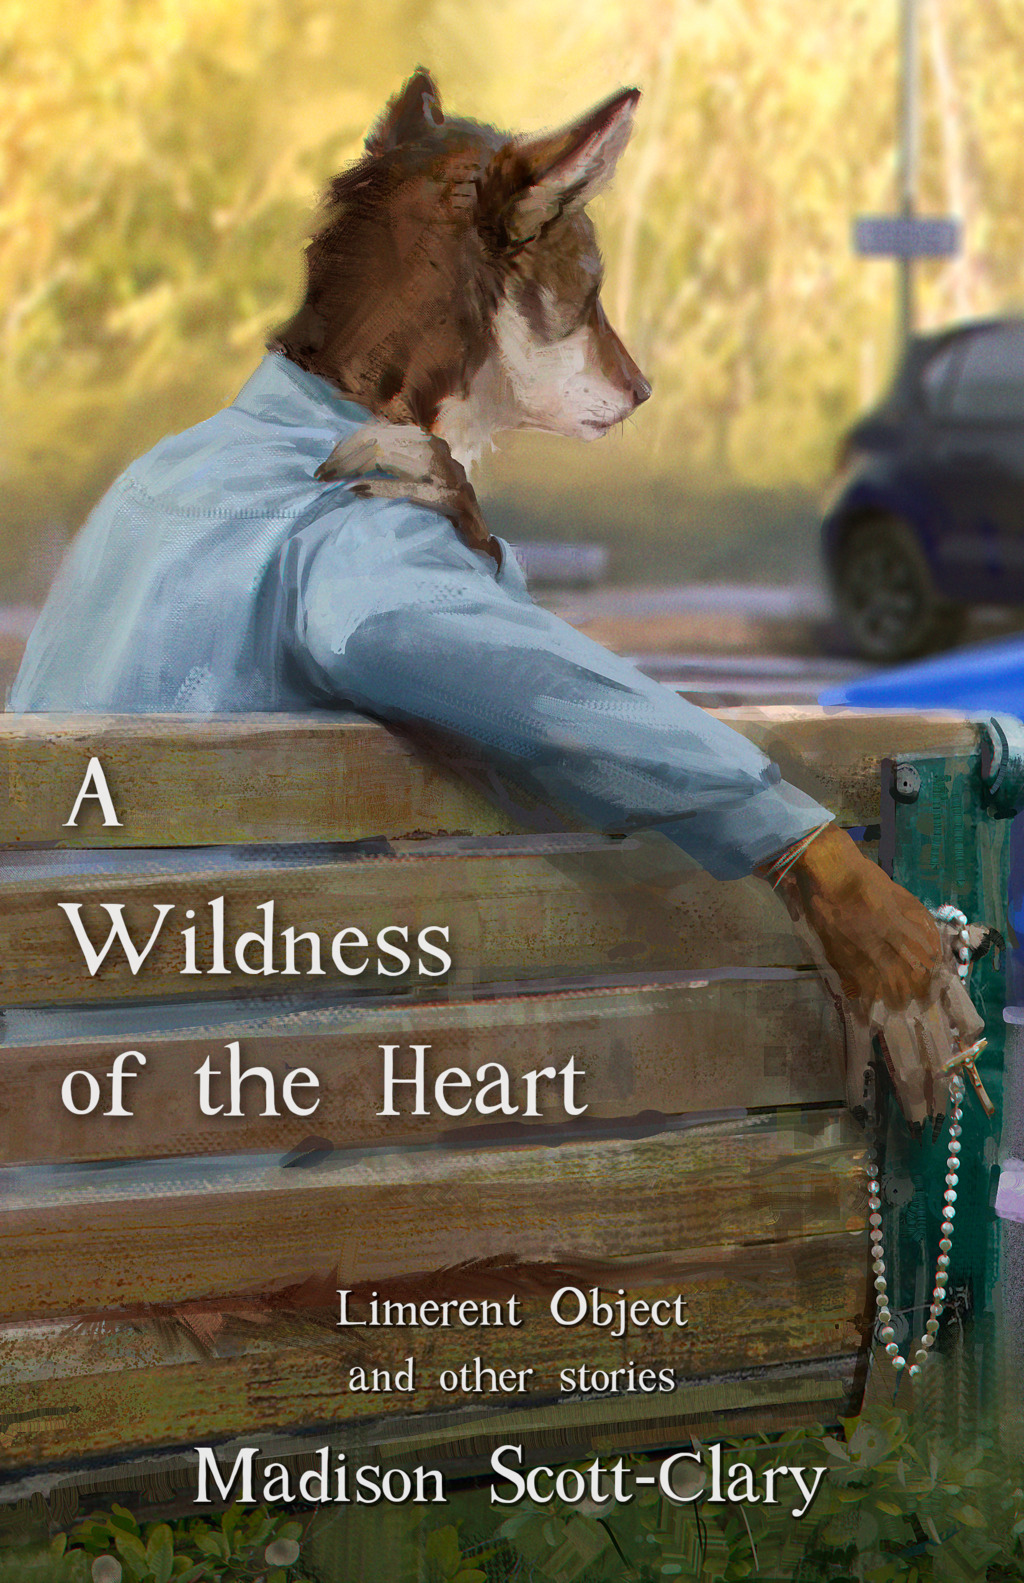 A Wildness of the Heart - Limerent Object and other stories